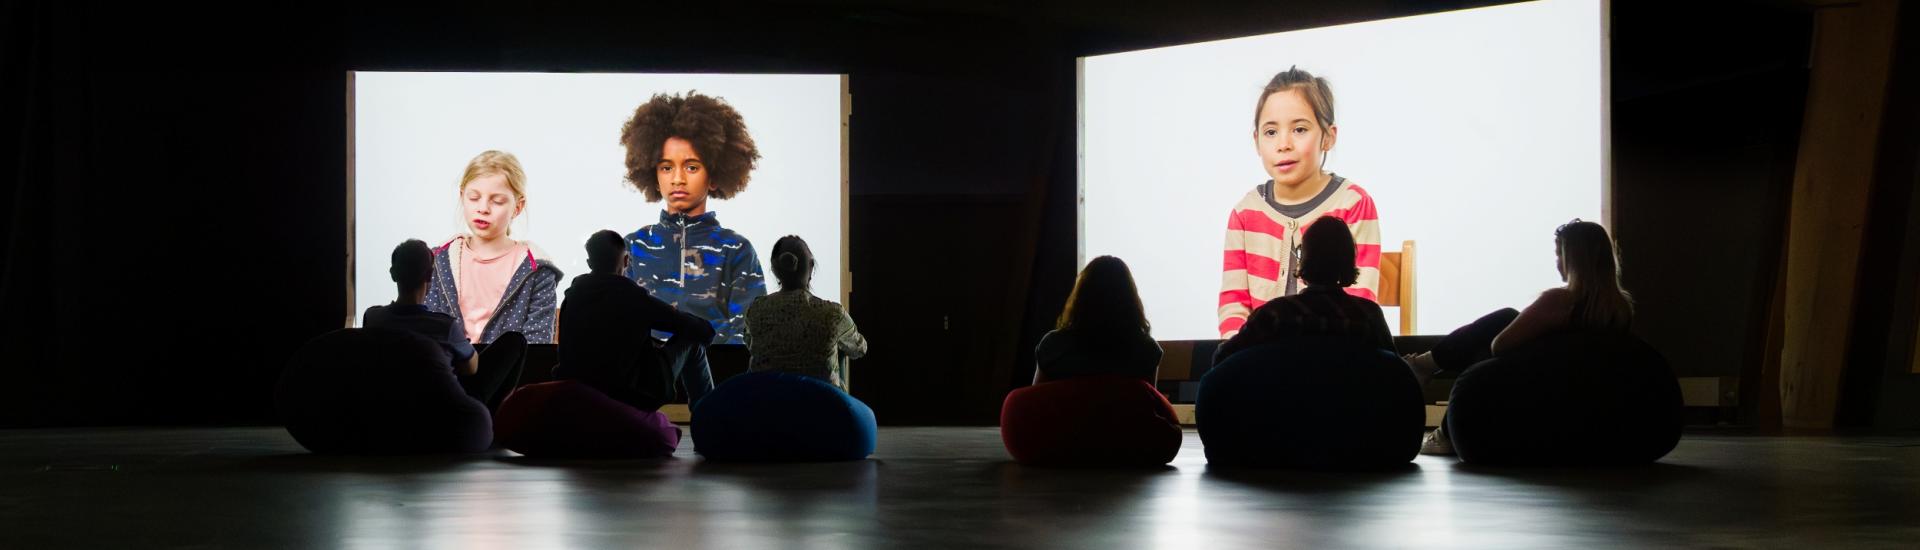 People in a dark exhibition space silhouetted against two screens showing a projection of children talking